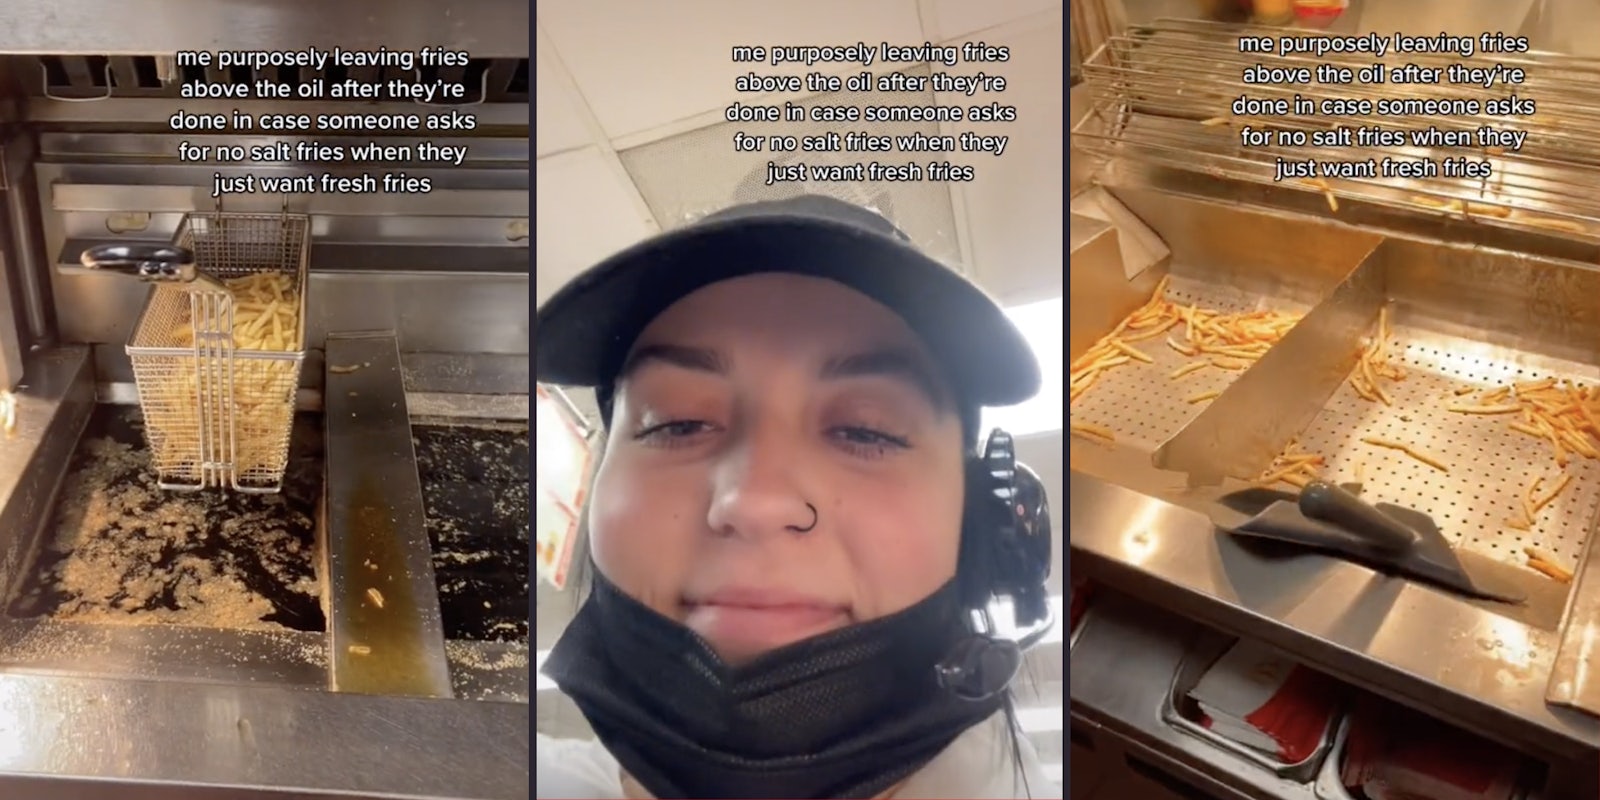 McDonald's worker shows how they get around customer's fresh fries hack.